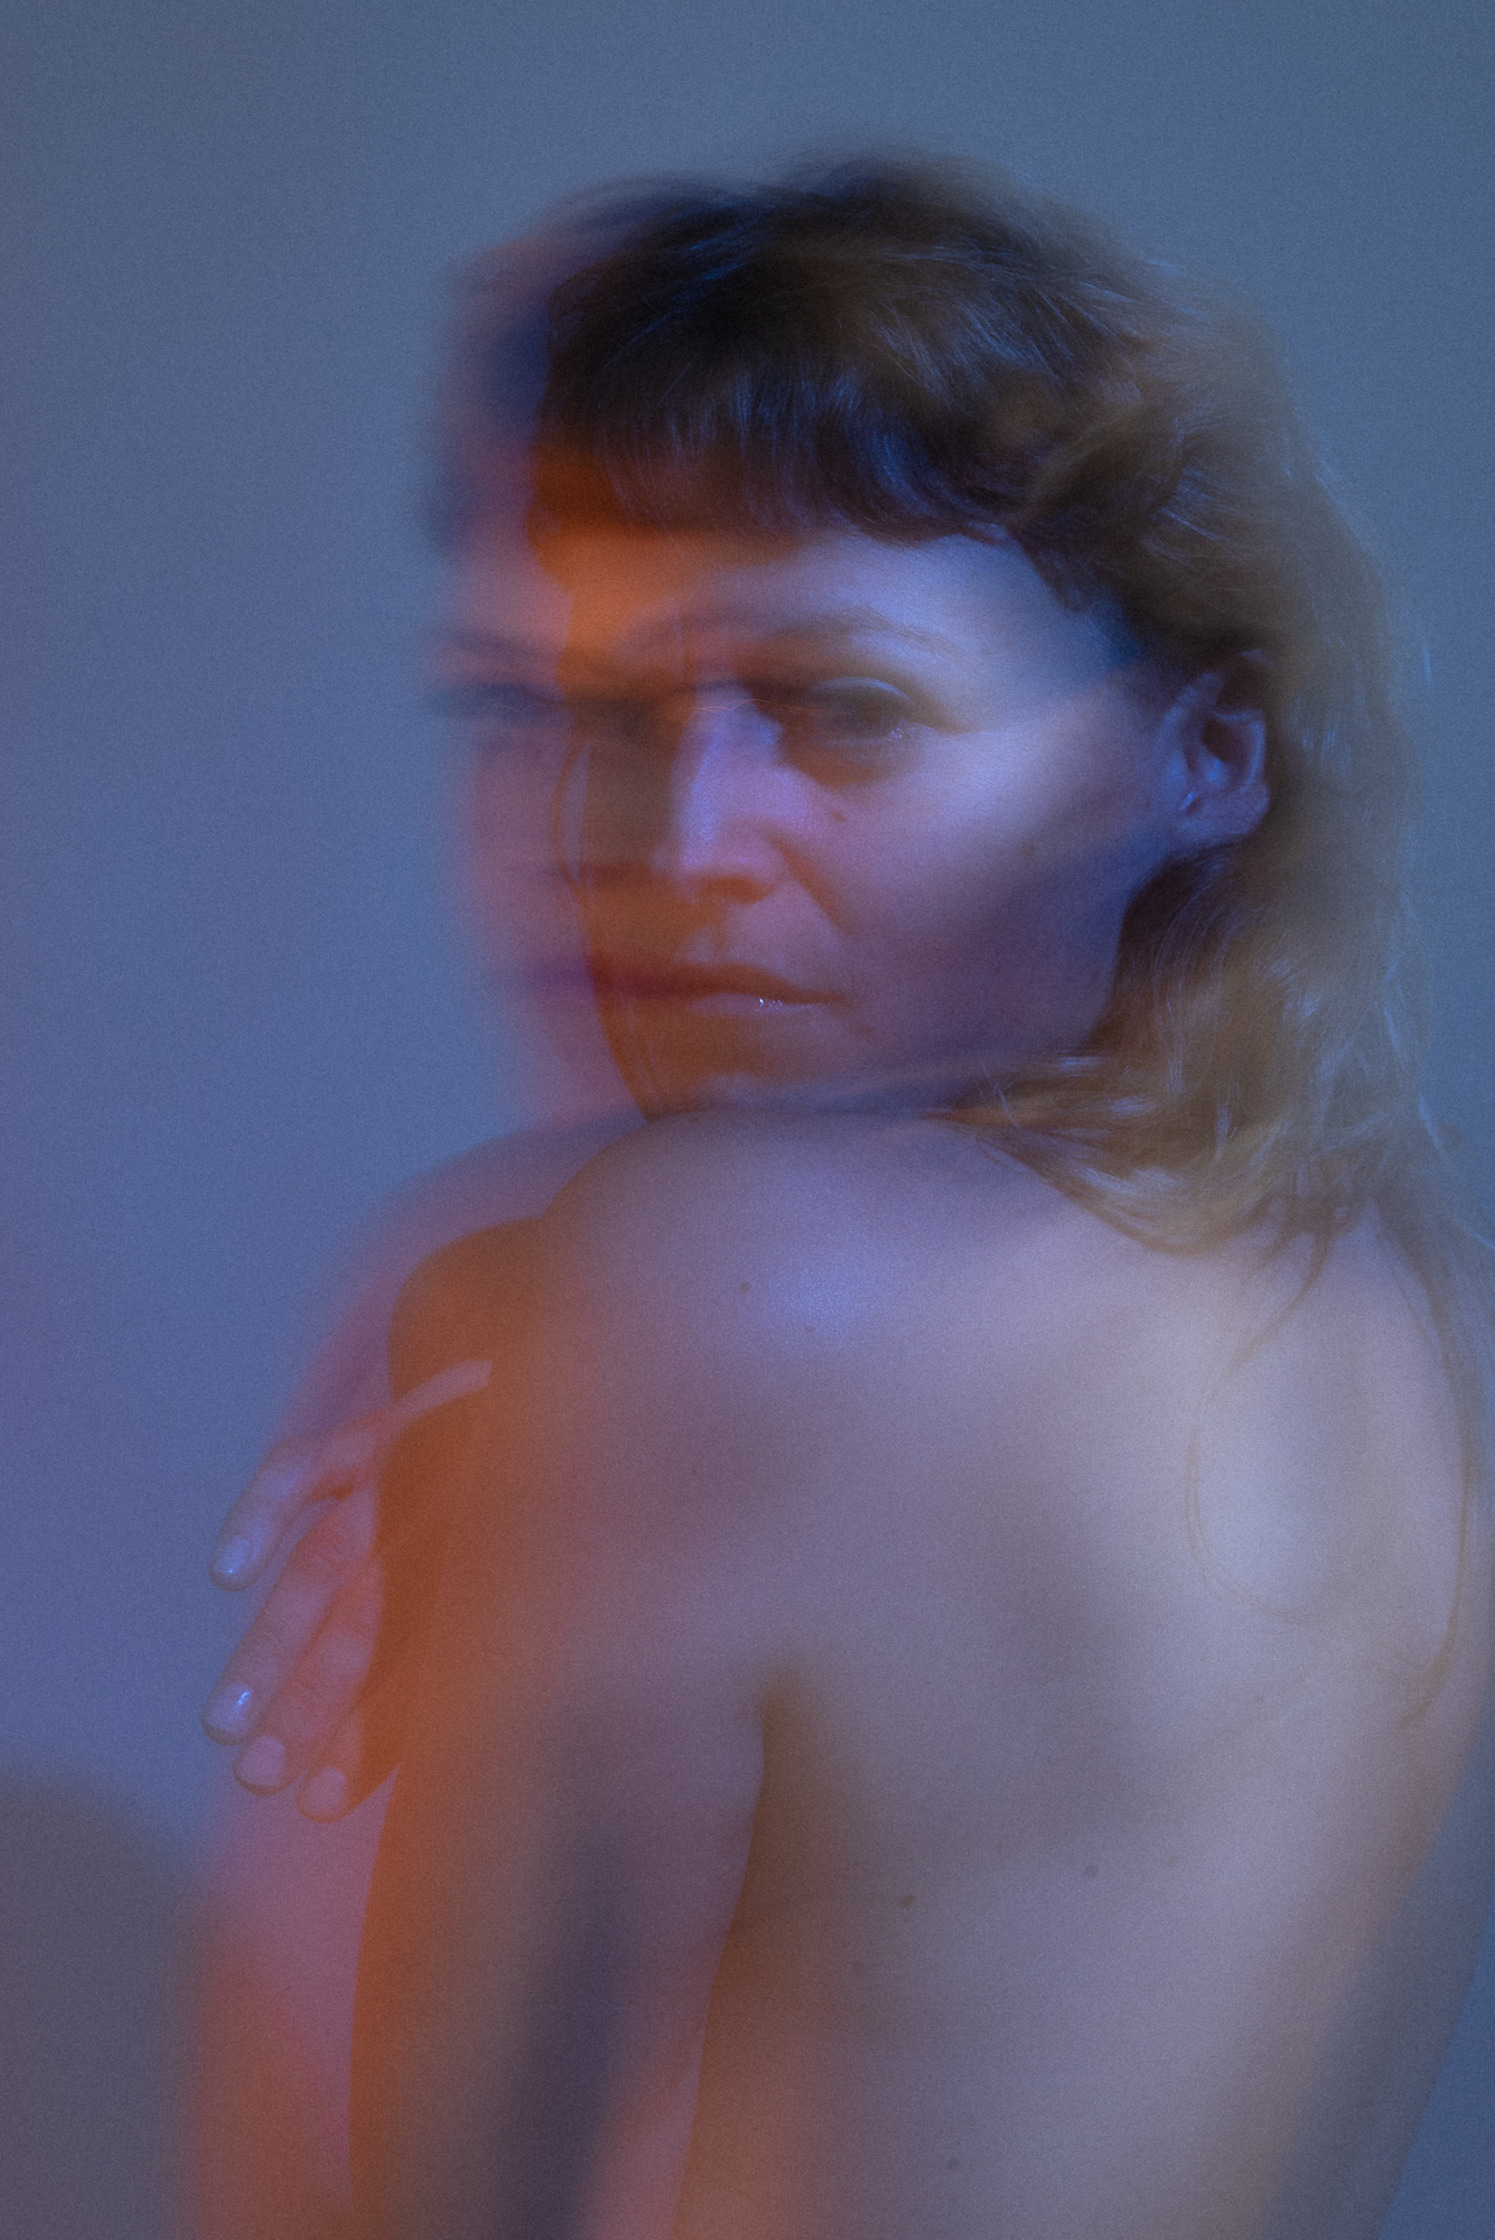 a blurry image of a  naked woman in blue and yellow